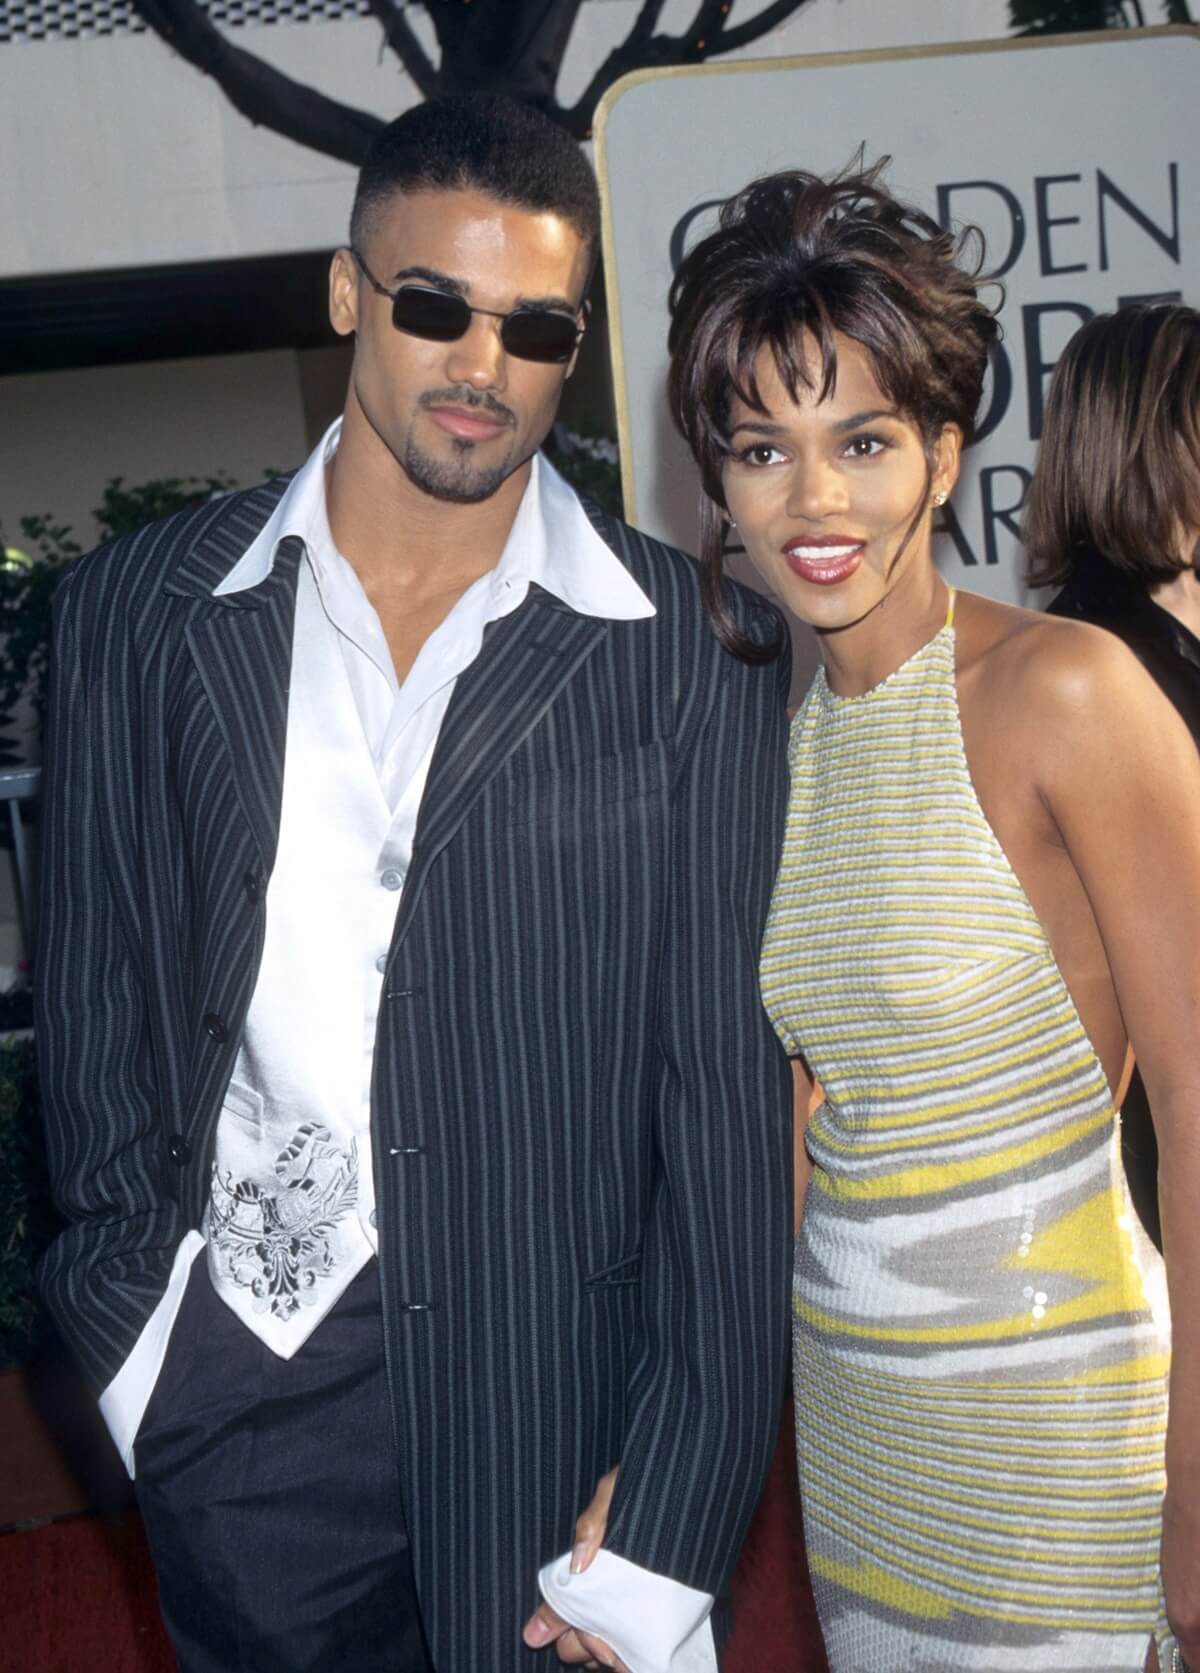 Halle Berry posing with Shemar Moore at an event.